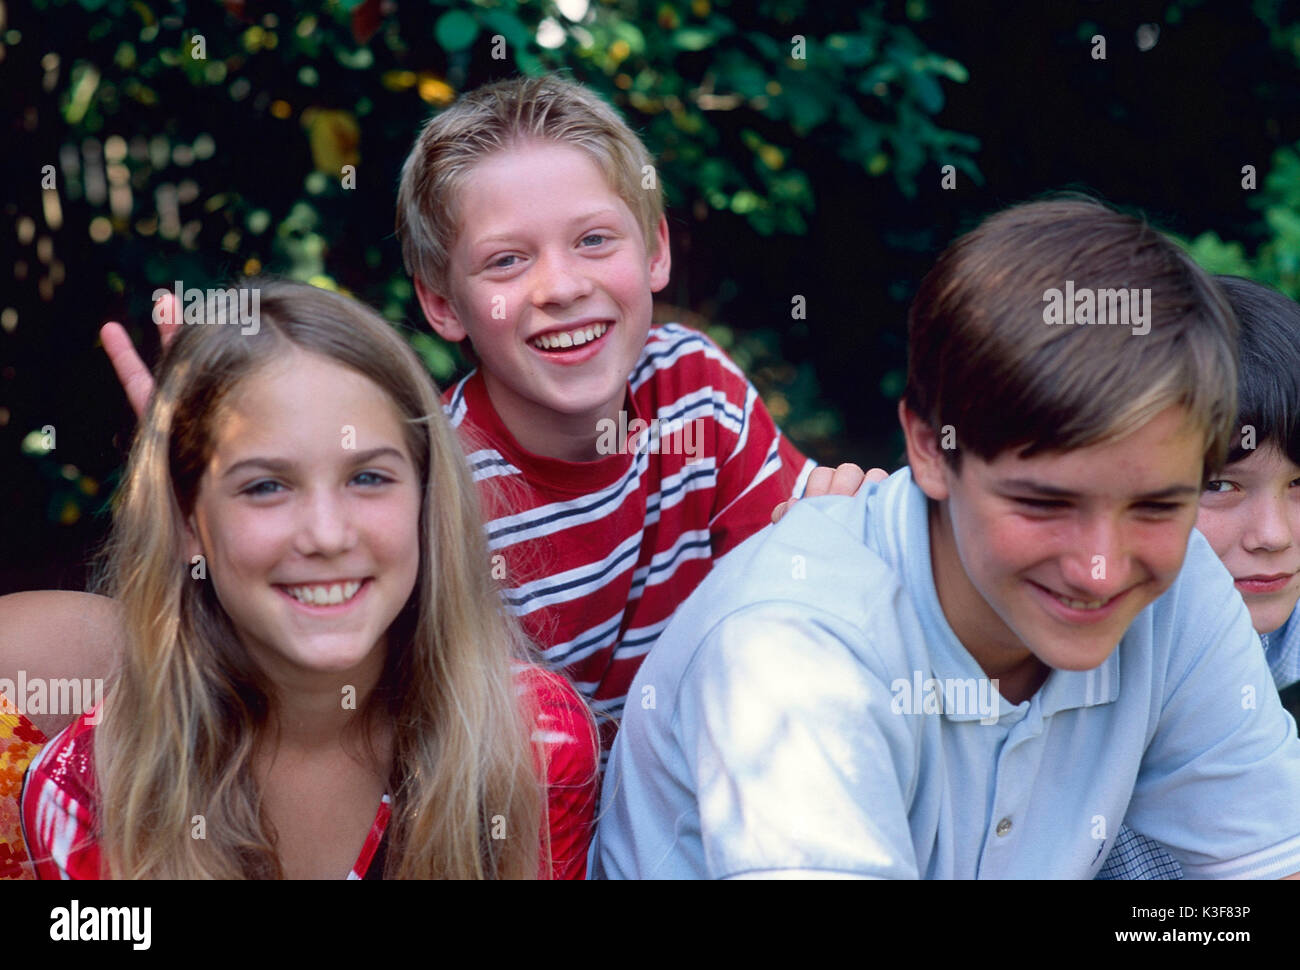 Group of laughing children / of young persons Stock Photo